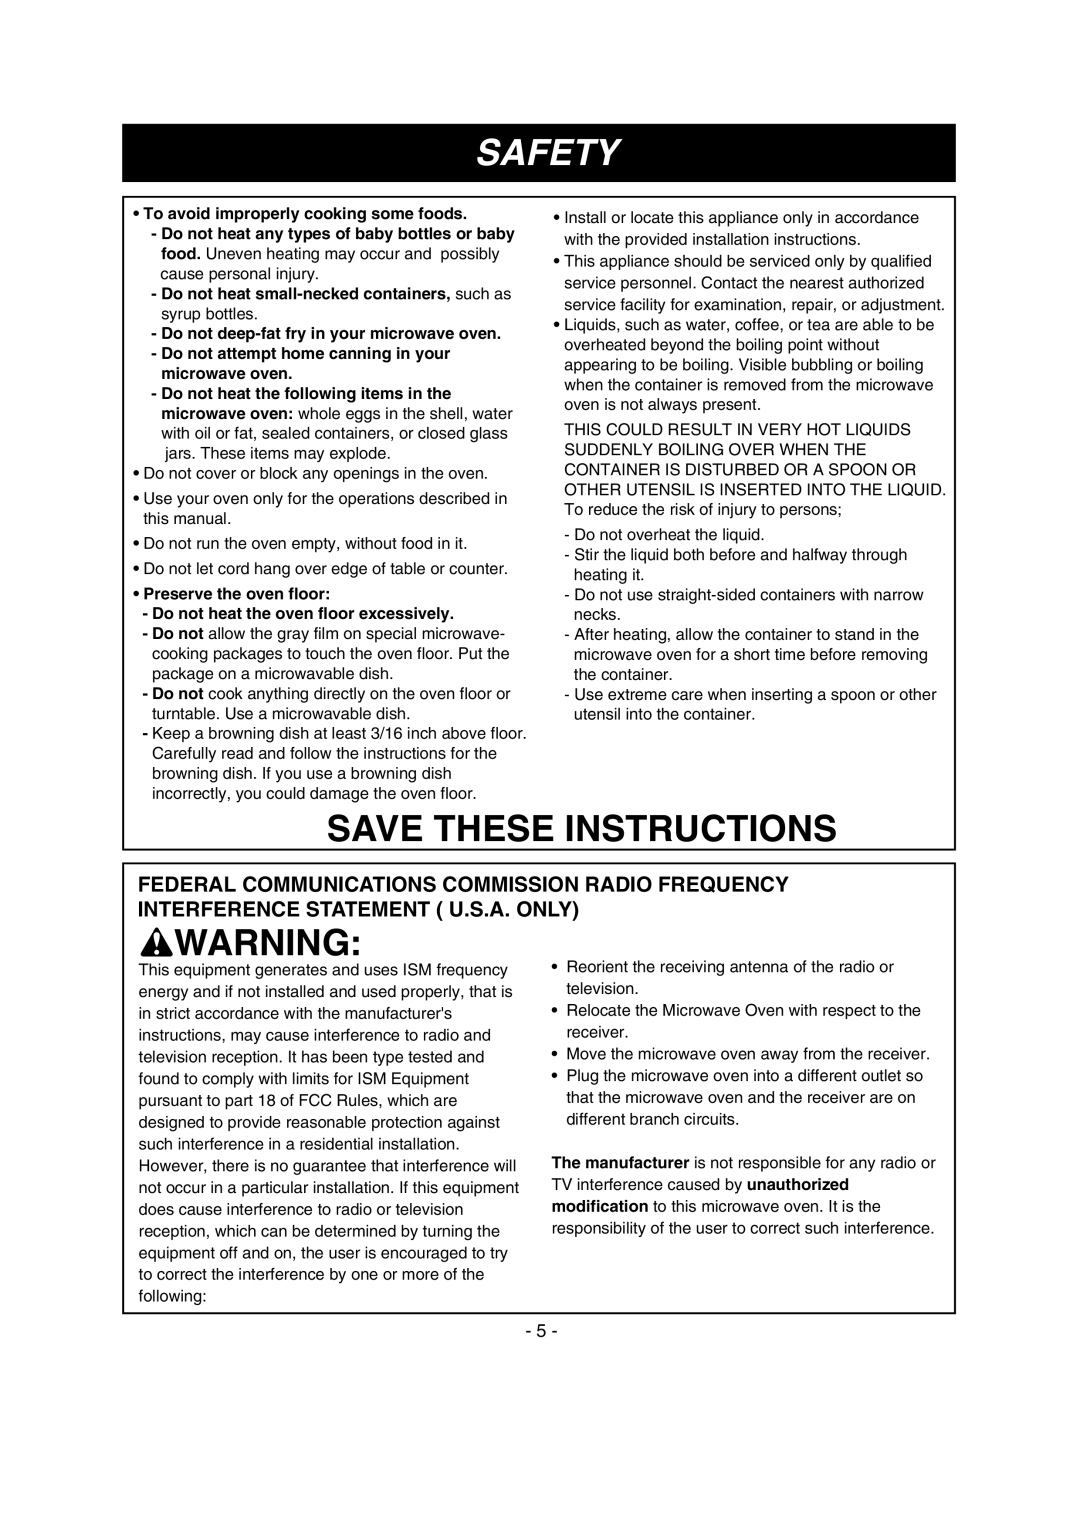 LG Electronics LMV1680ST, LMV1680WW Save These Instructions, wWARNING, Safety, To avoid improperly cooking some foods 